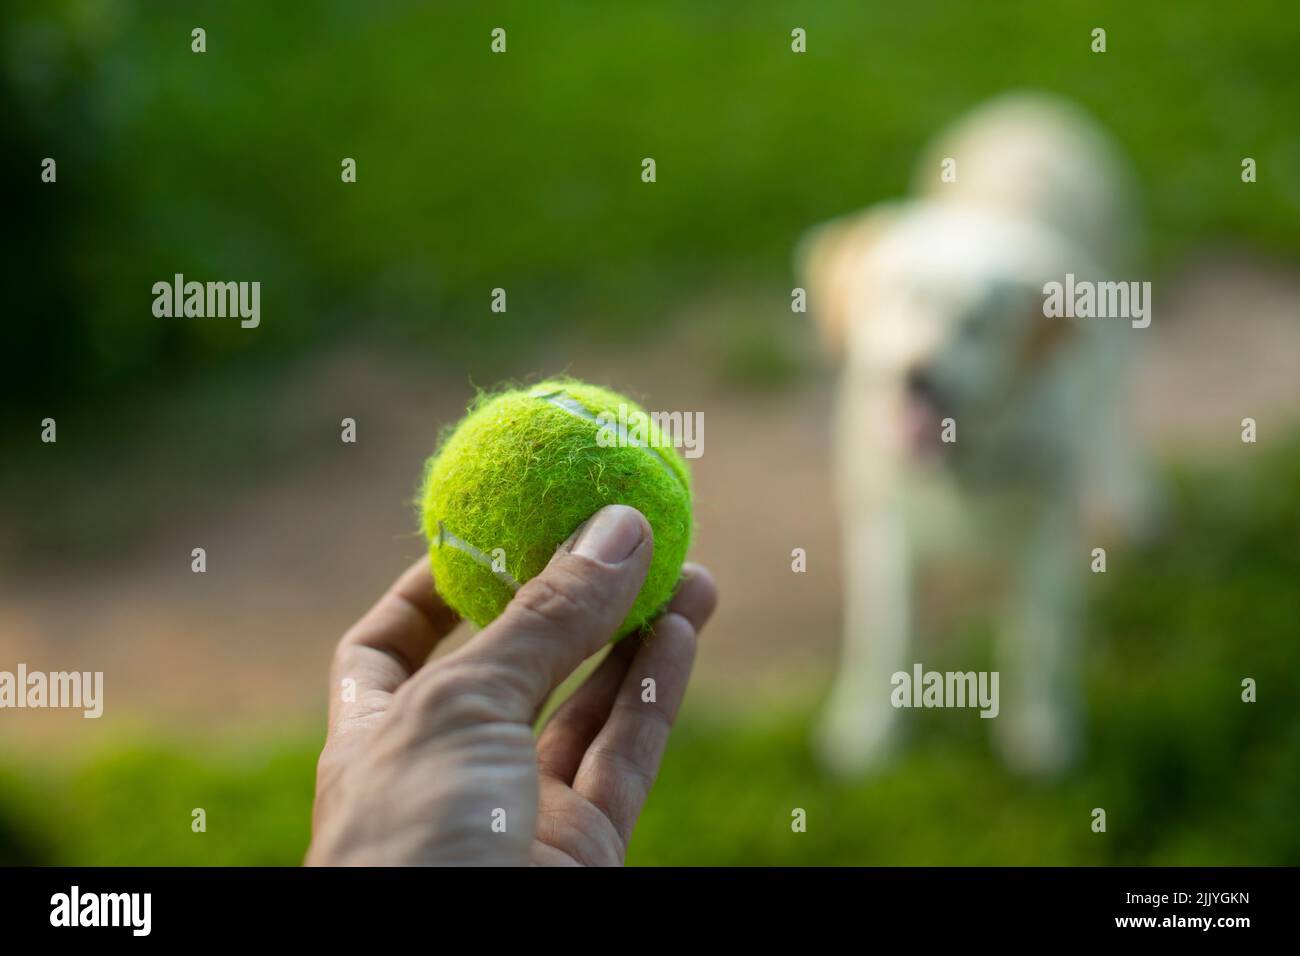 Tennis ball and dog. Ball to throw to dog. Green ball in his hand. Stock Photo